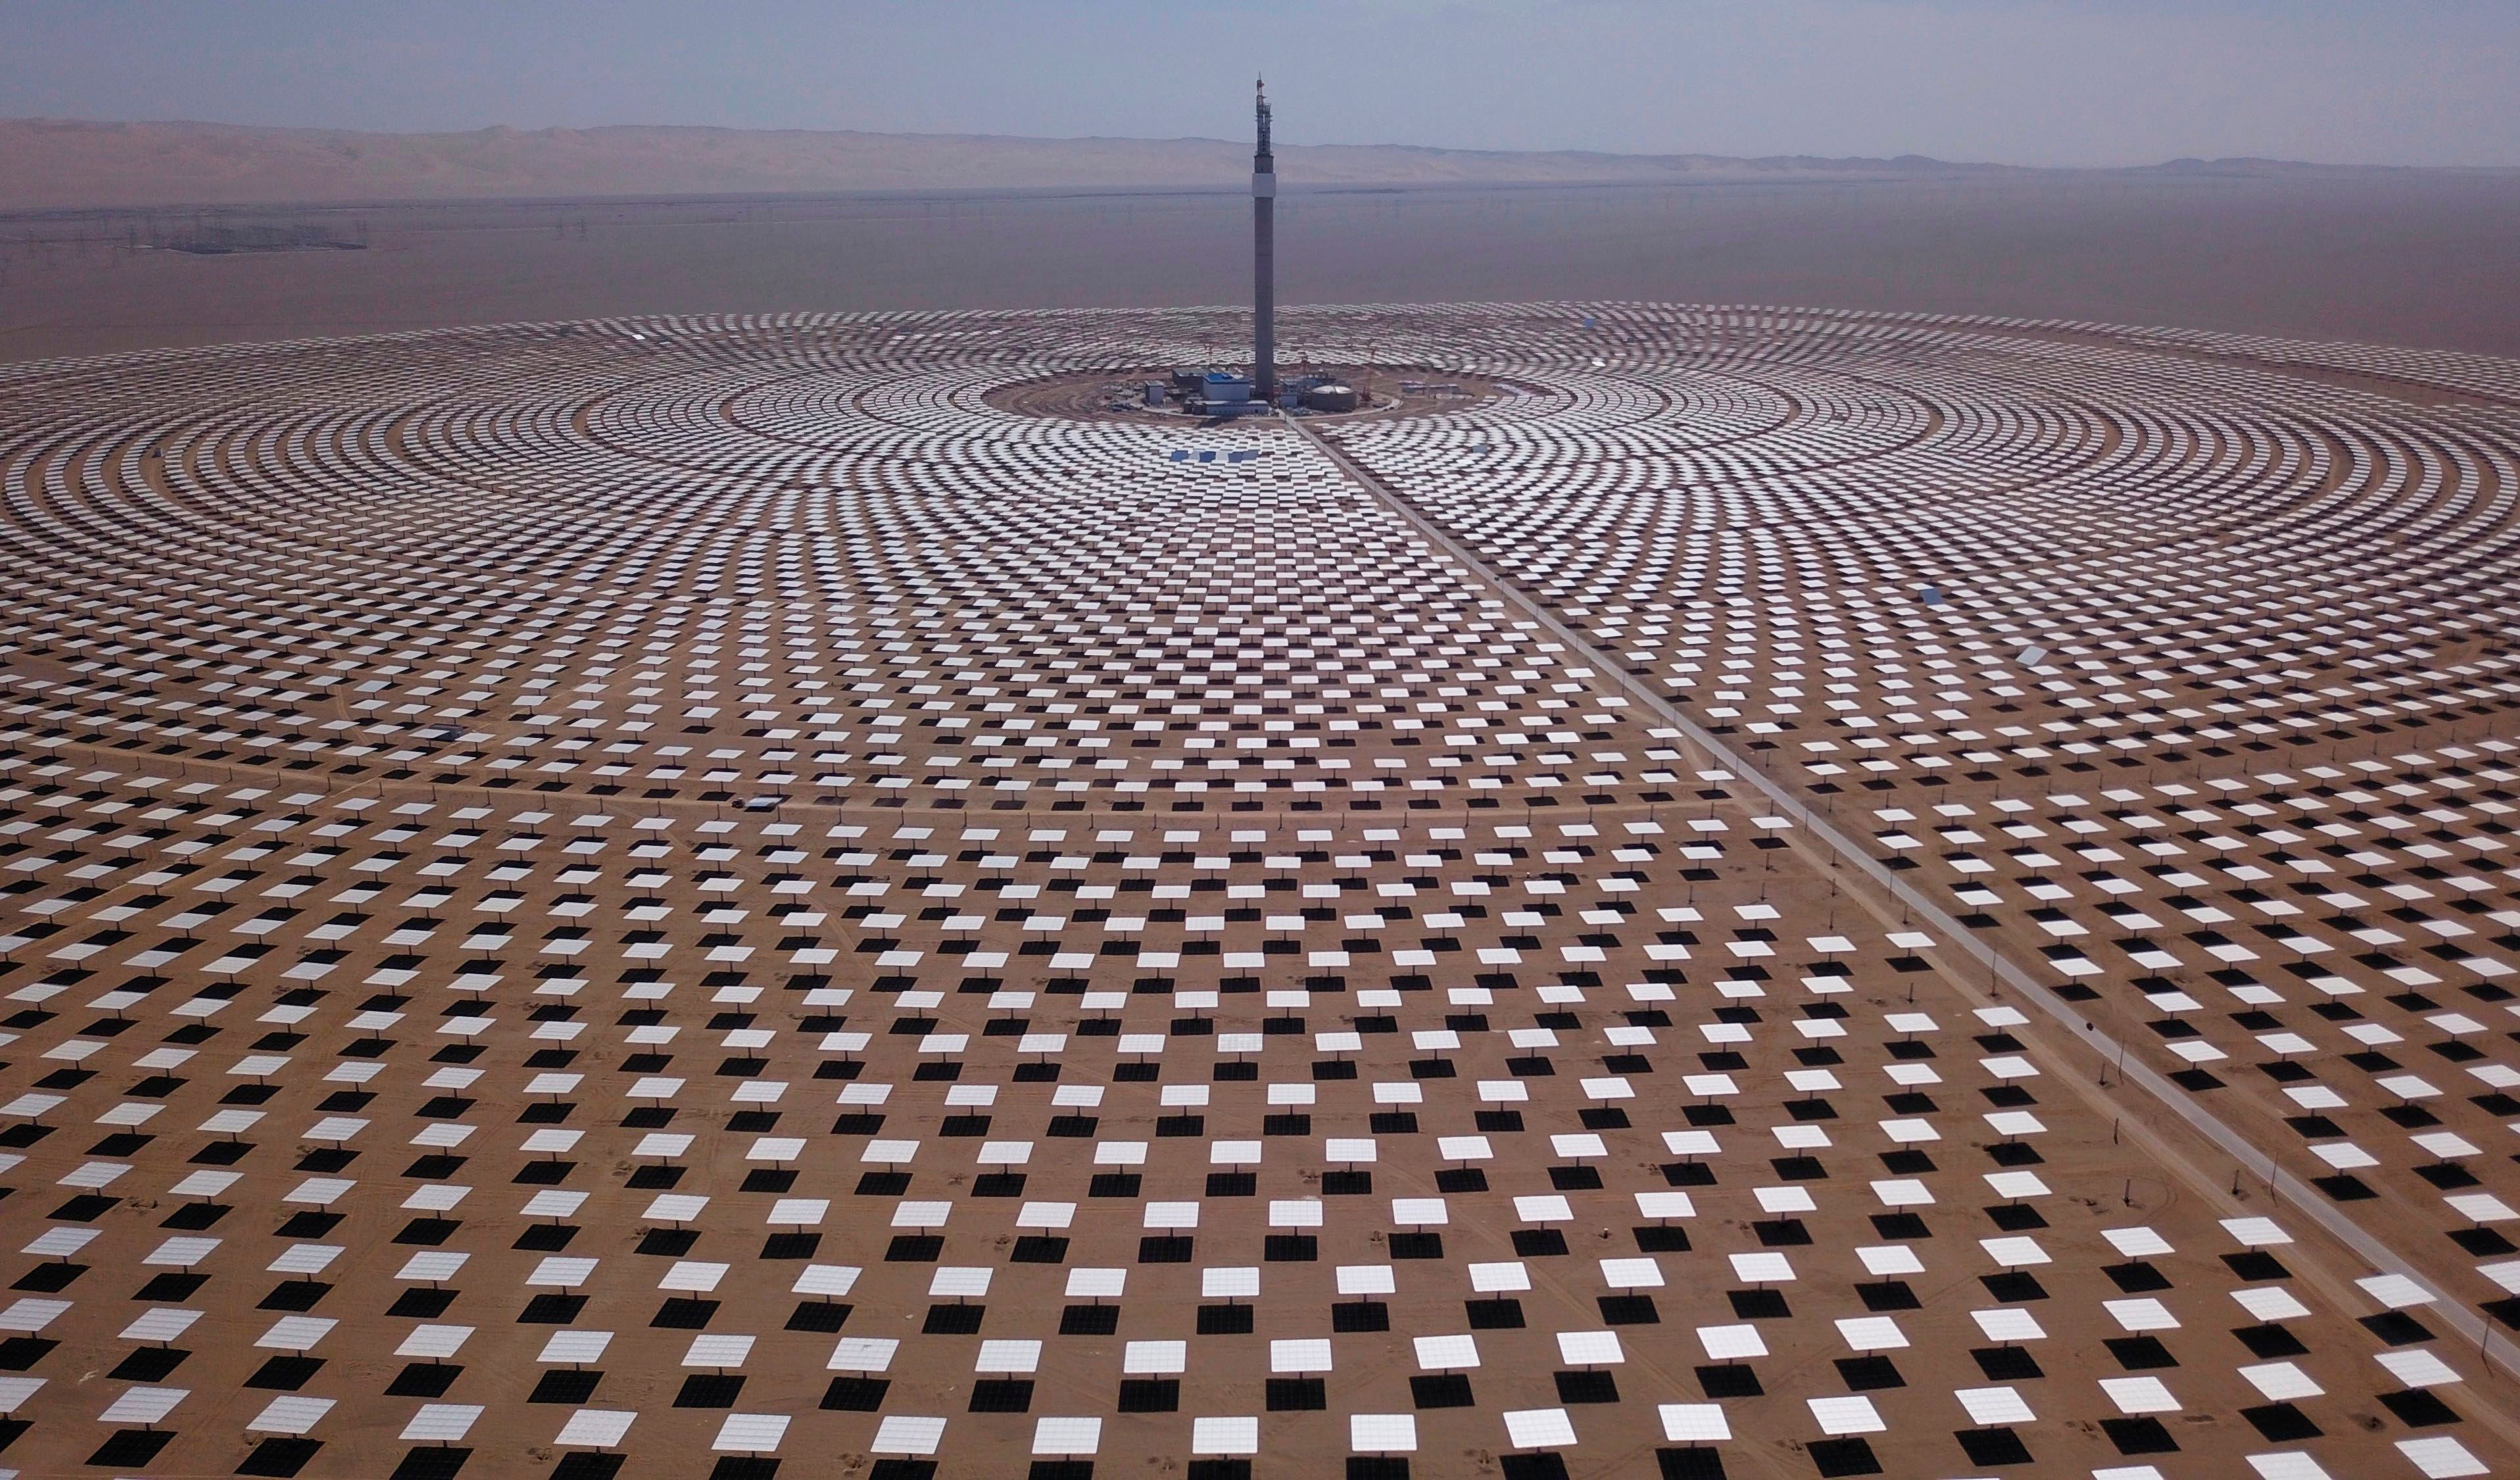 A solar thermal power plant in Dunhuang in China’s northwestern Gansu province. The World Energy Outlook 2020 from the International Energy Agency reported that solar power is now providing among the cheapest electricity in history